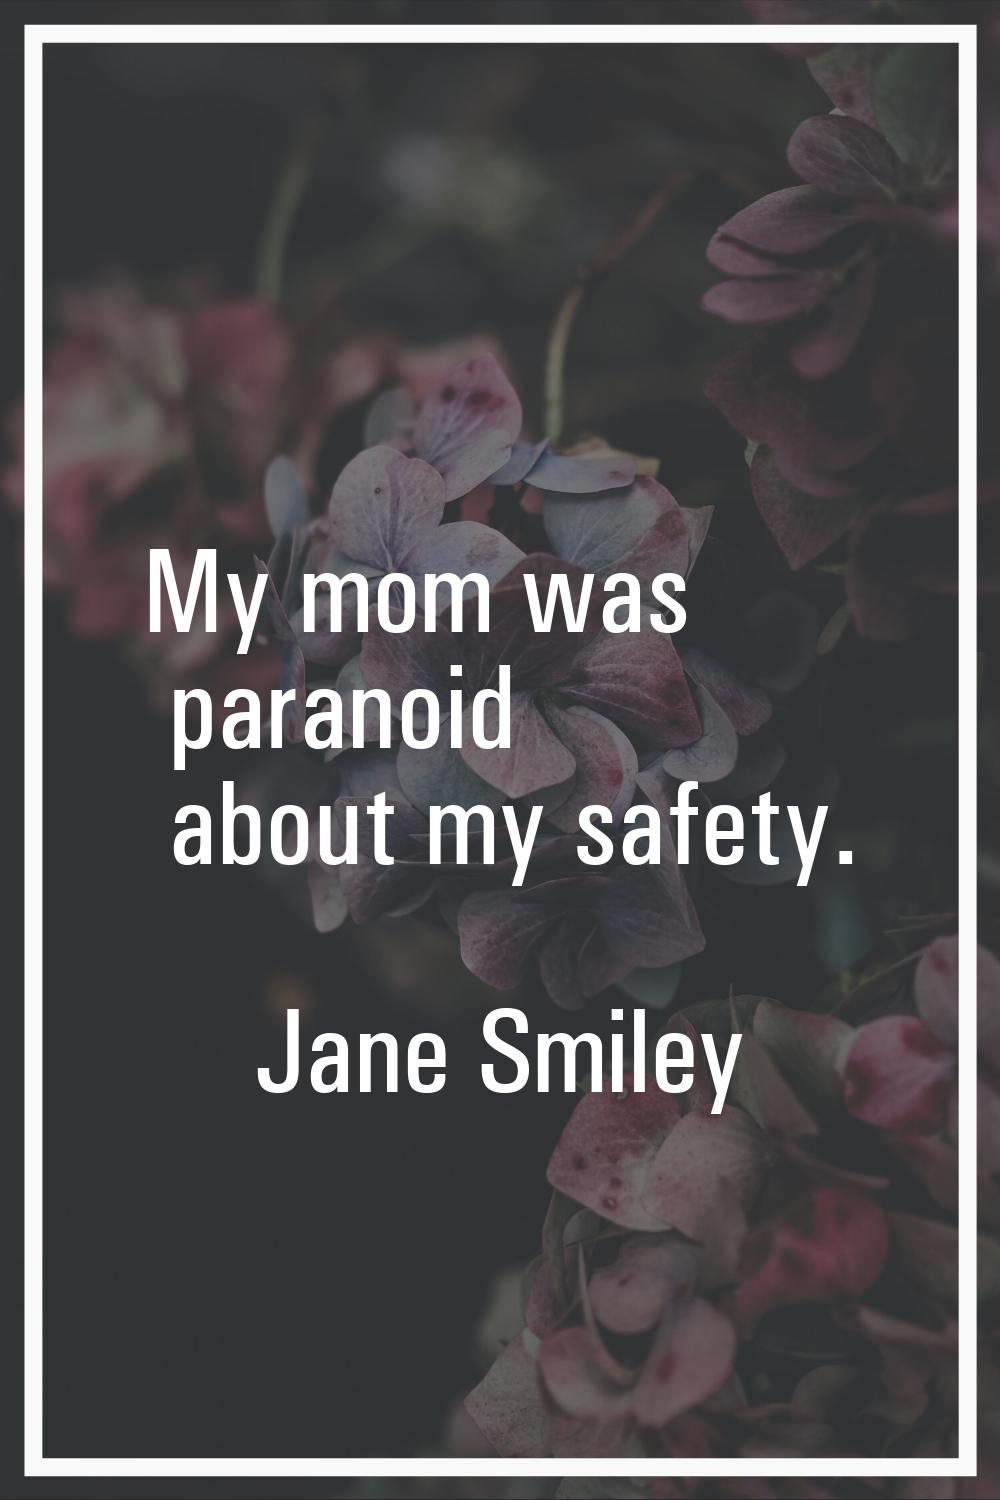 My mom was paranoid about my safety.